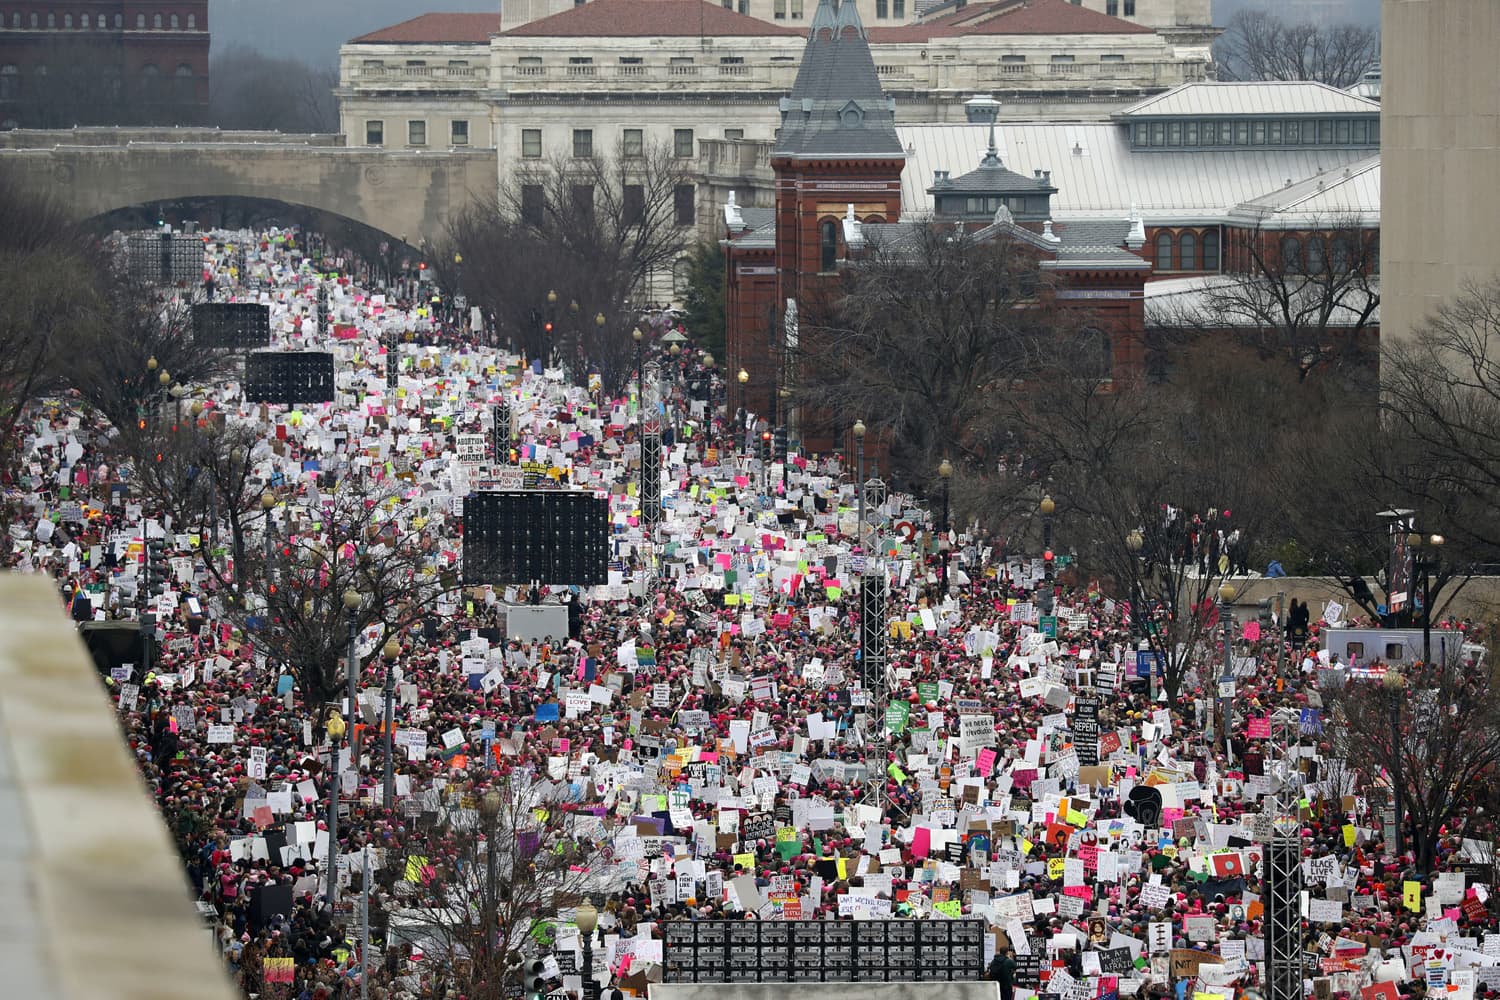 A crowd fills Independence Avenue during the Women's March on Washington. (Alex Brandon/AP)